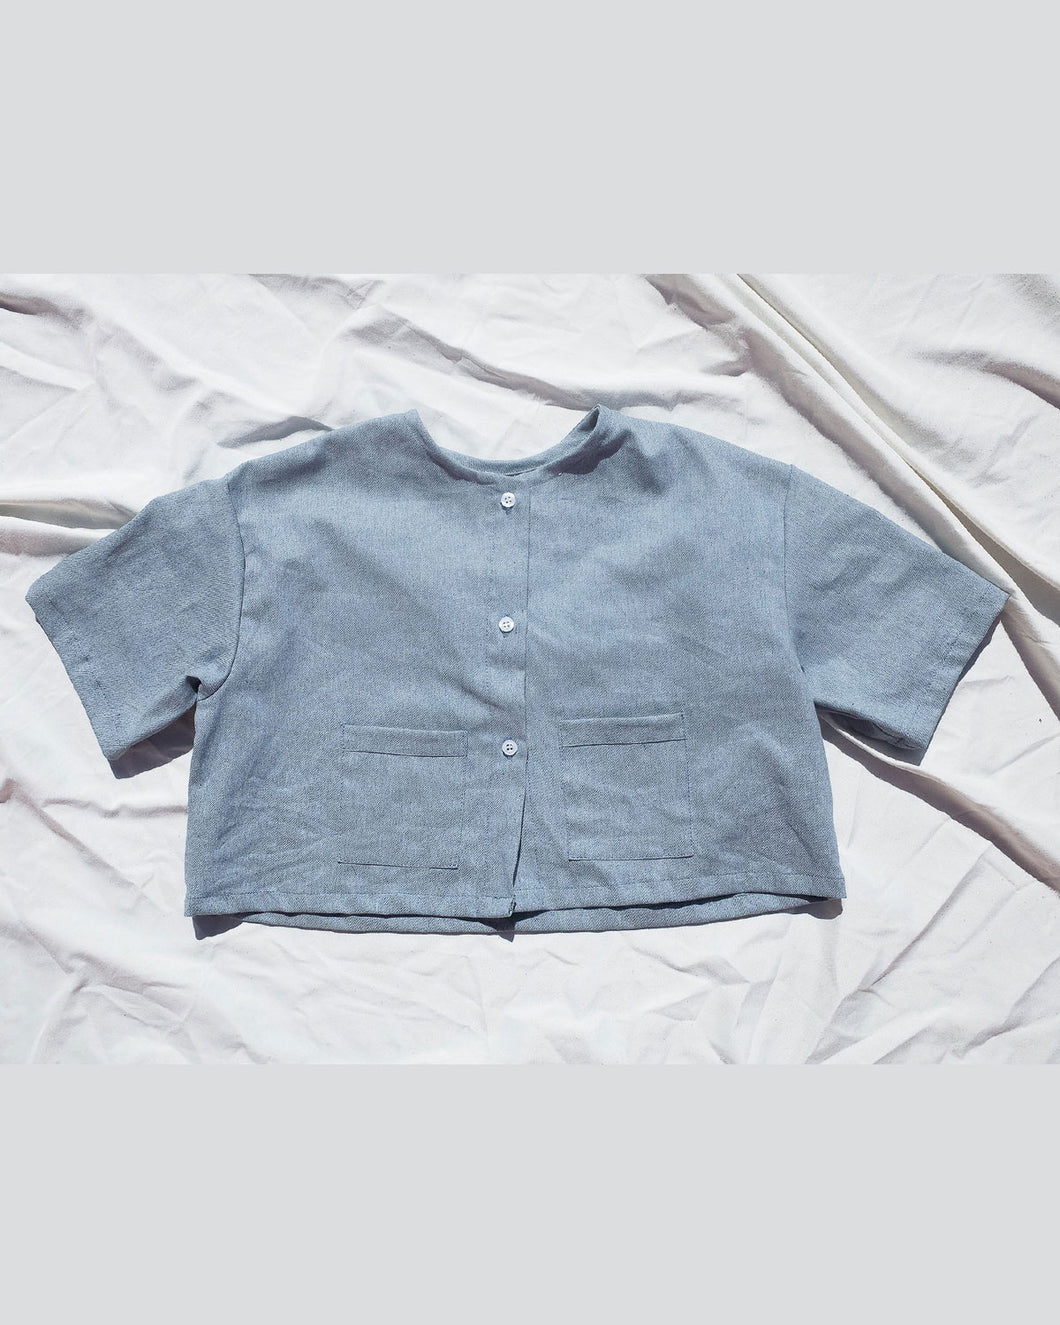 Gender neutral shirt for toddlers and kids. Premium Upcycled Denim Button Up Top with Denim Pockets